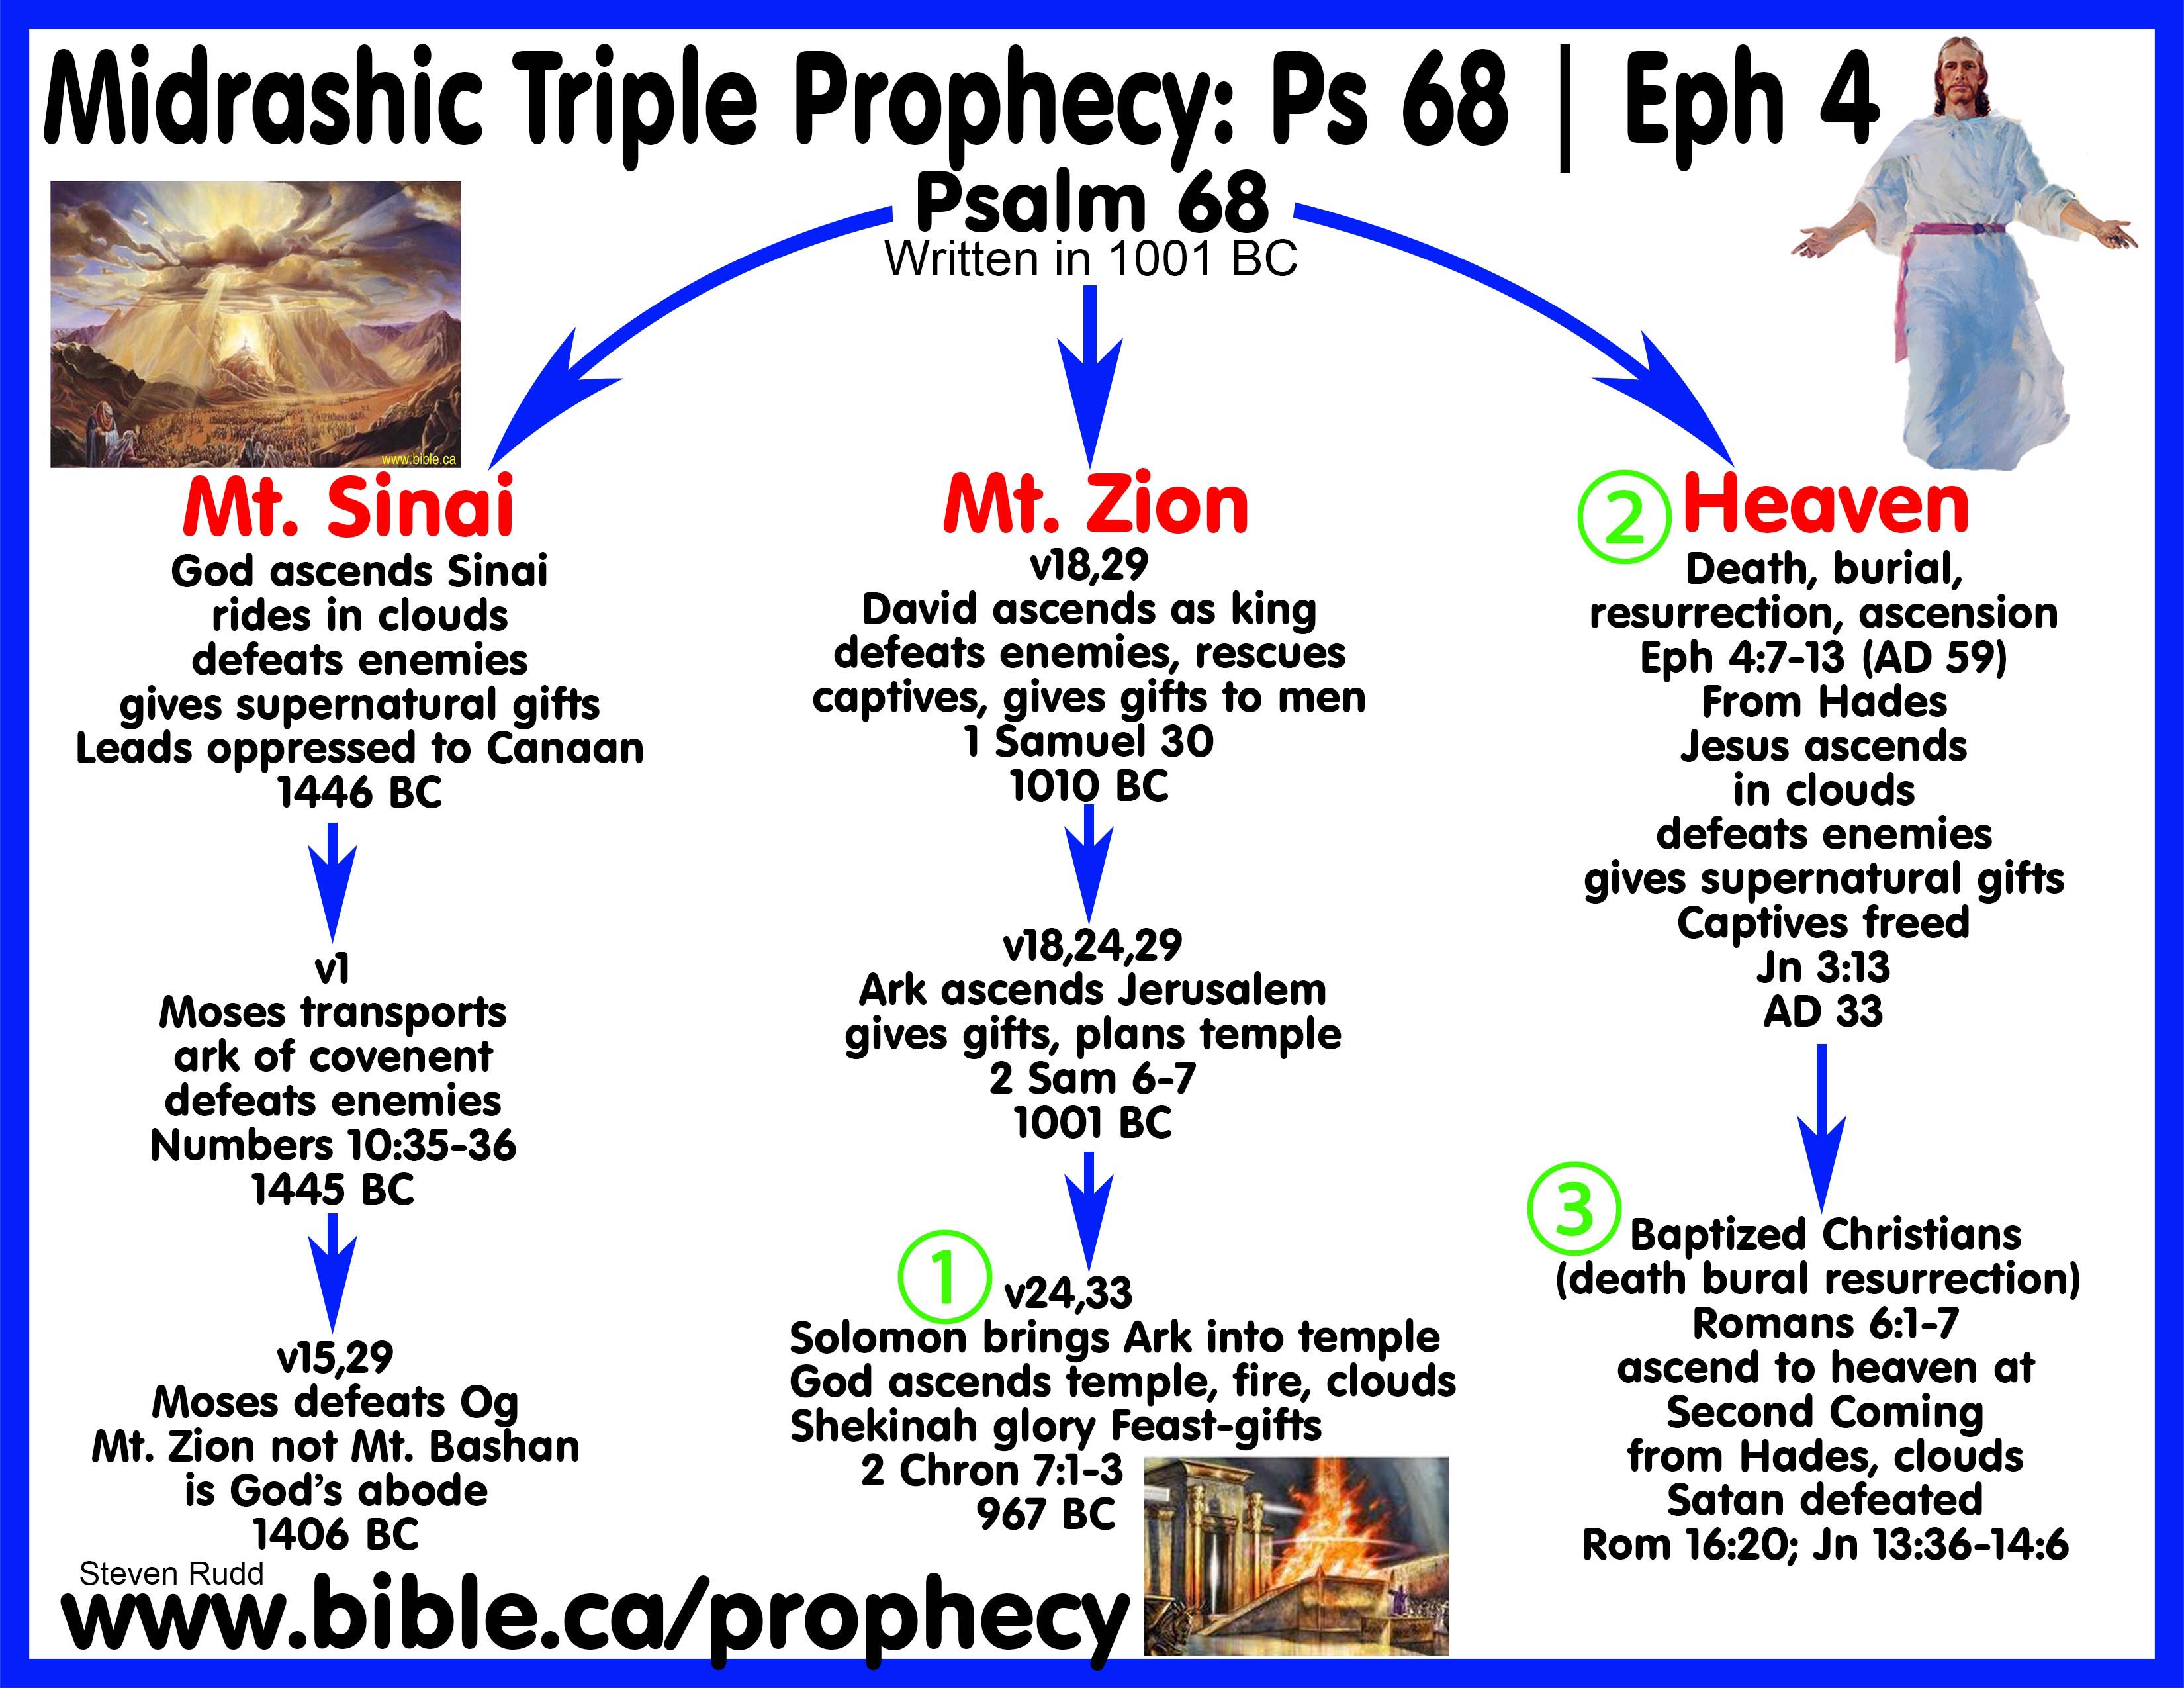 Messianic Bible Prophecy Fulfilled Psalm 68 “He descended and ascended”